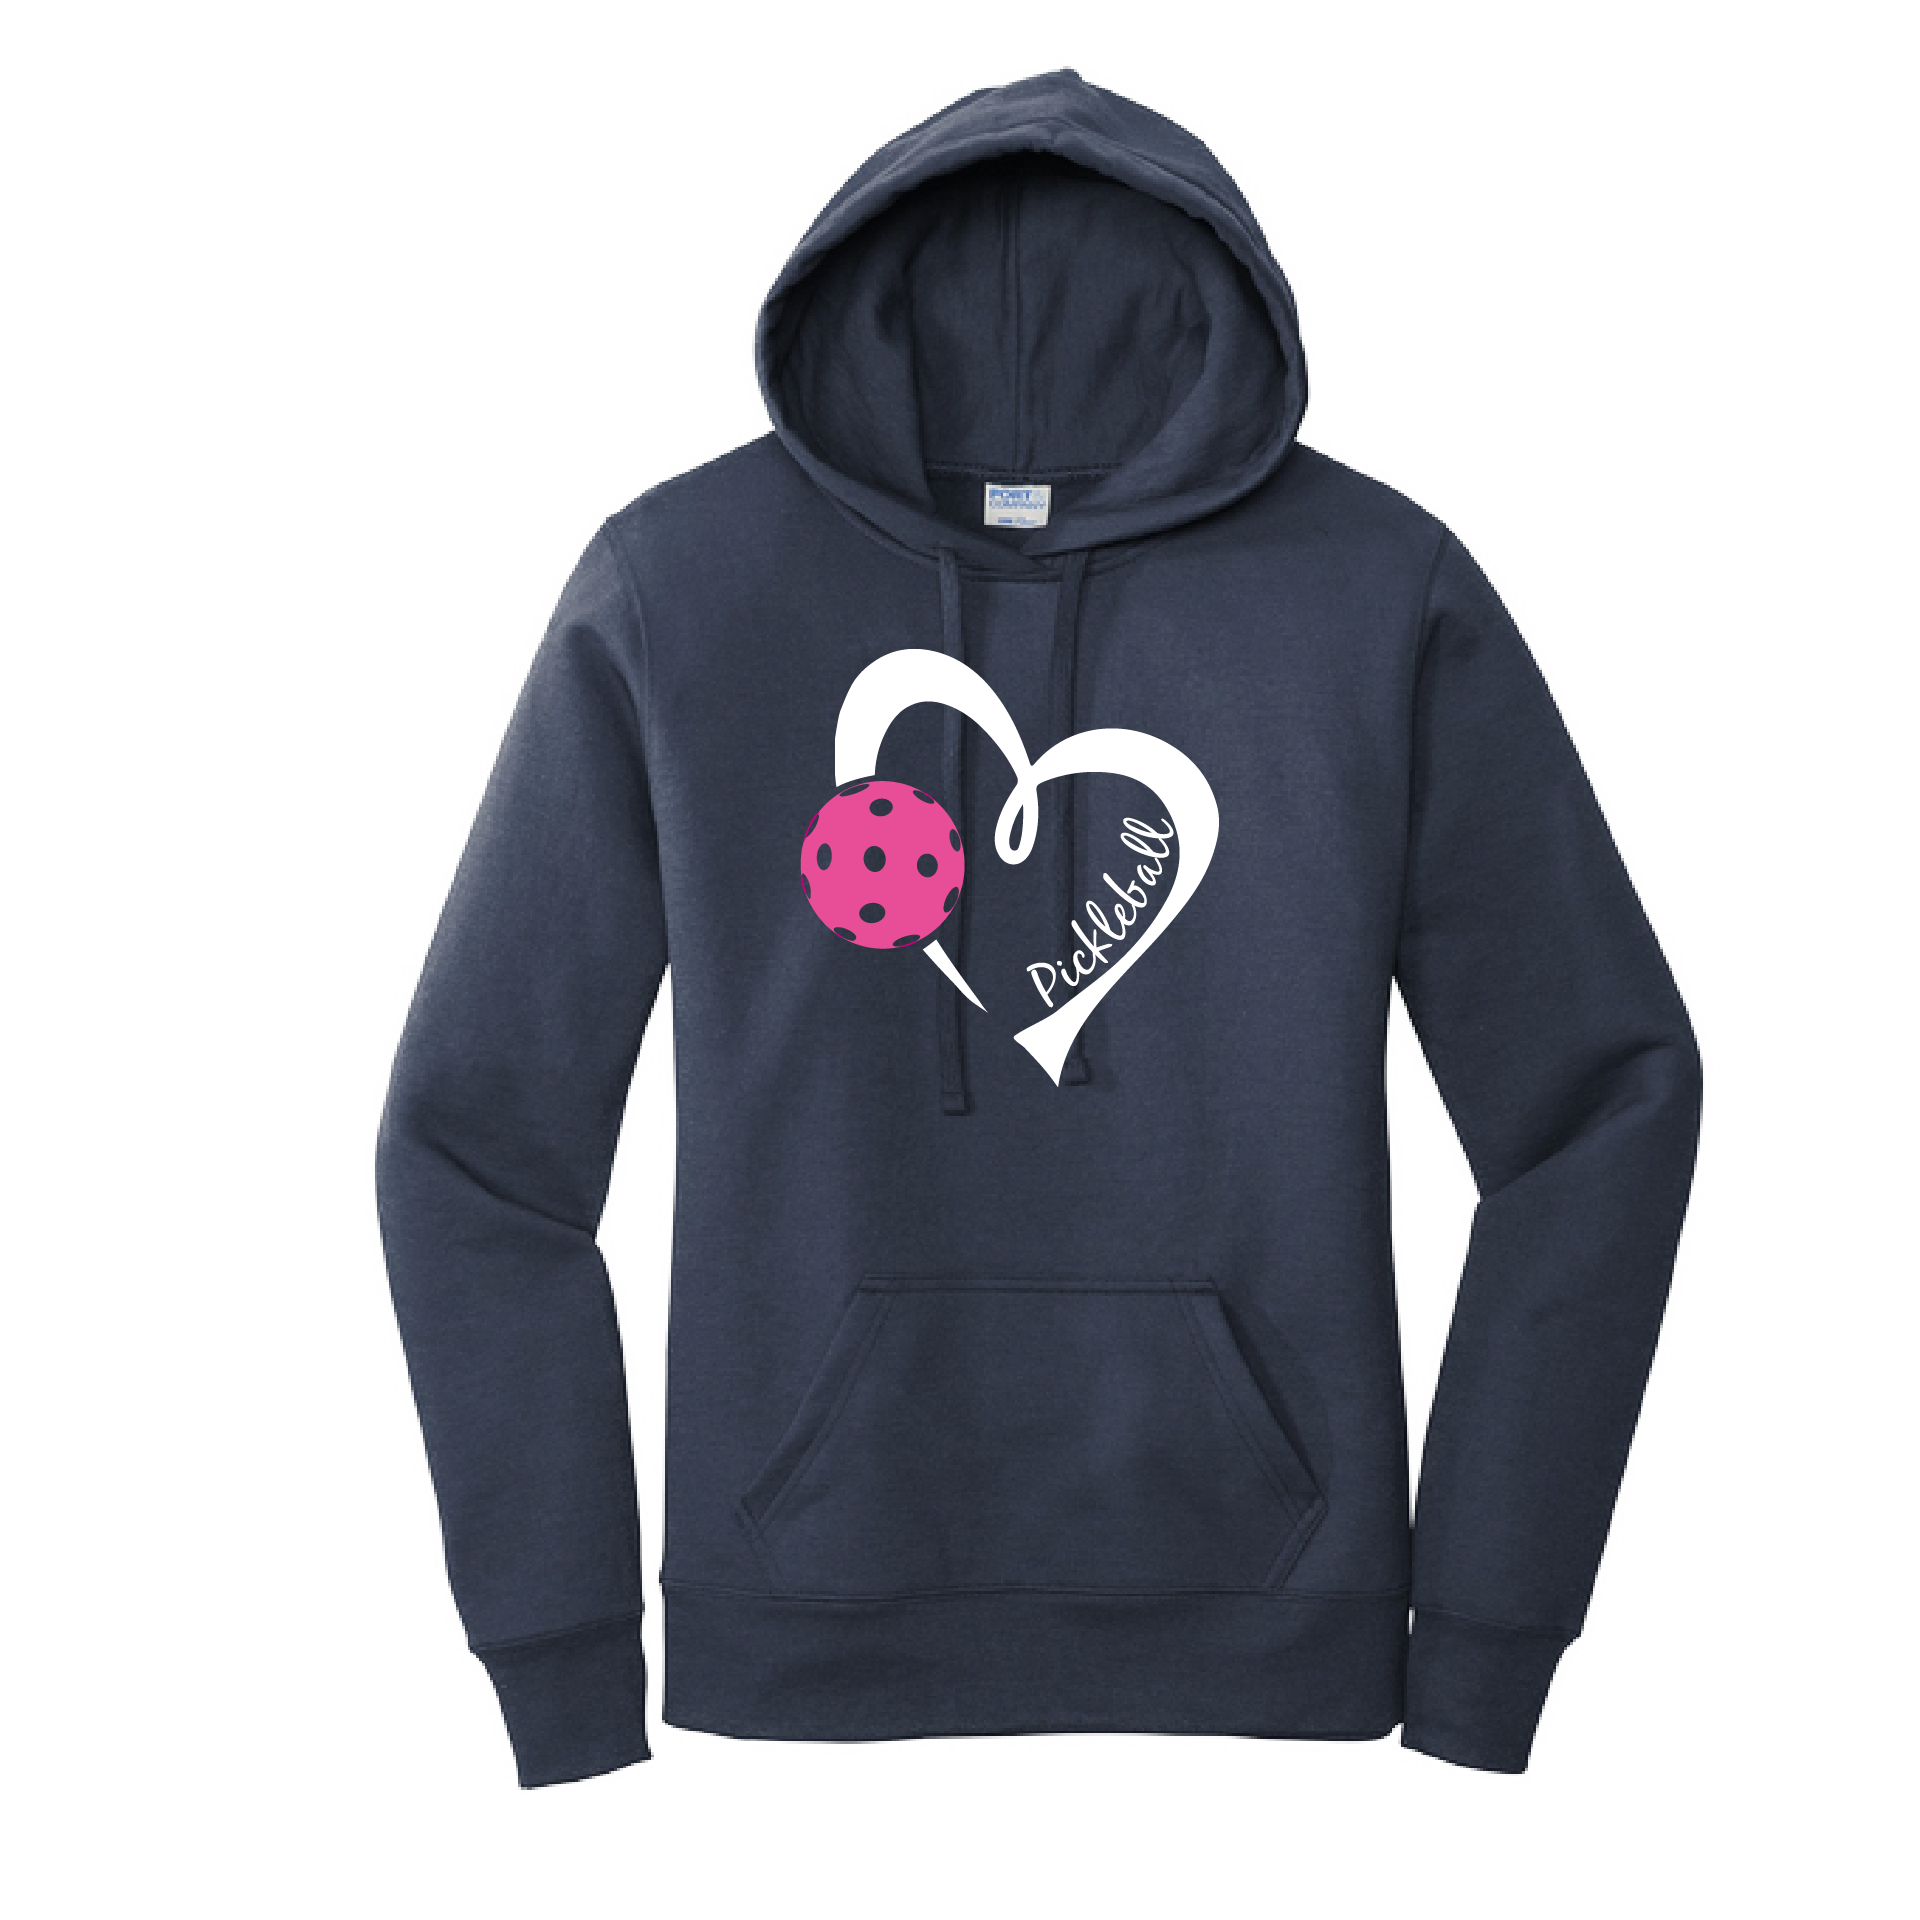 Pickleball Design: Heart with Pickleball  Women's Hooded pullover Sweatshirt  Turn up the volume in this Women's Sweatshirts with its perfect mix of softness and attitude. Ultra soft lined inside with a lined hood also. This is fitted nicely for a women's figure. Front pouch pocket.